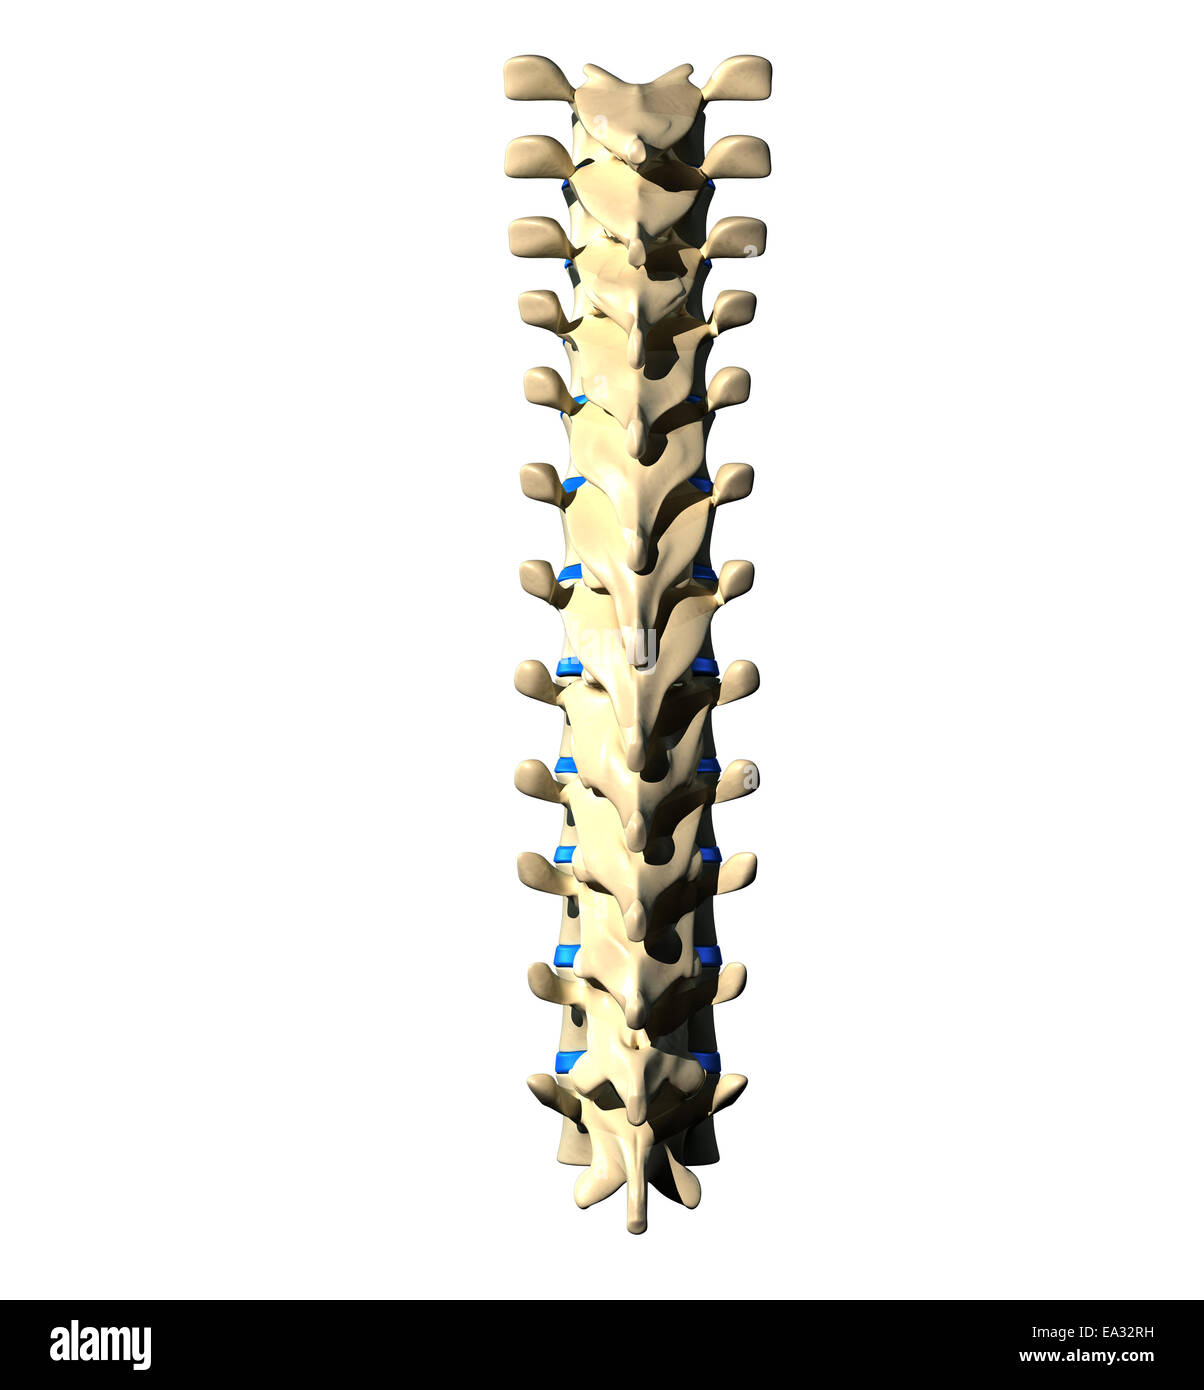 Thoracic Spine - Posterior view / Back view Stock Photo